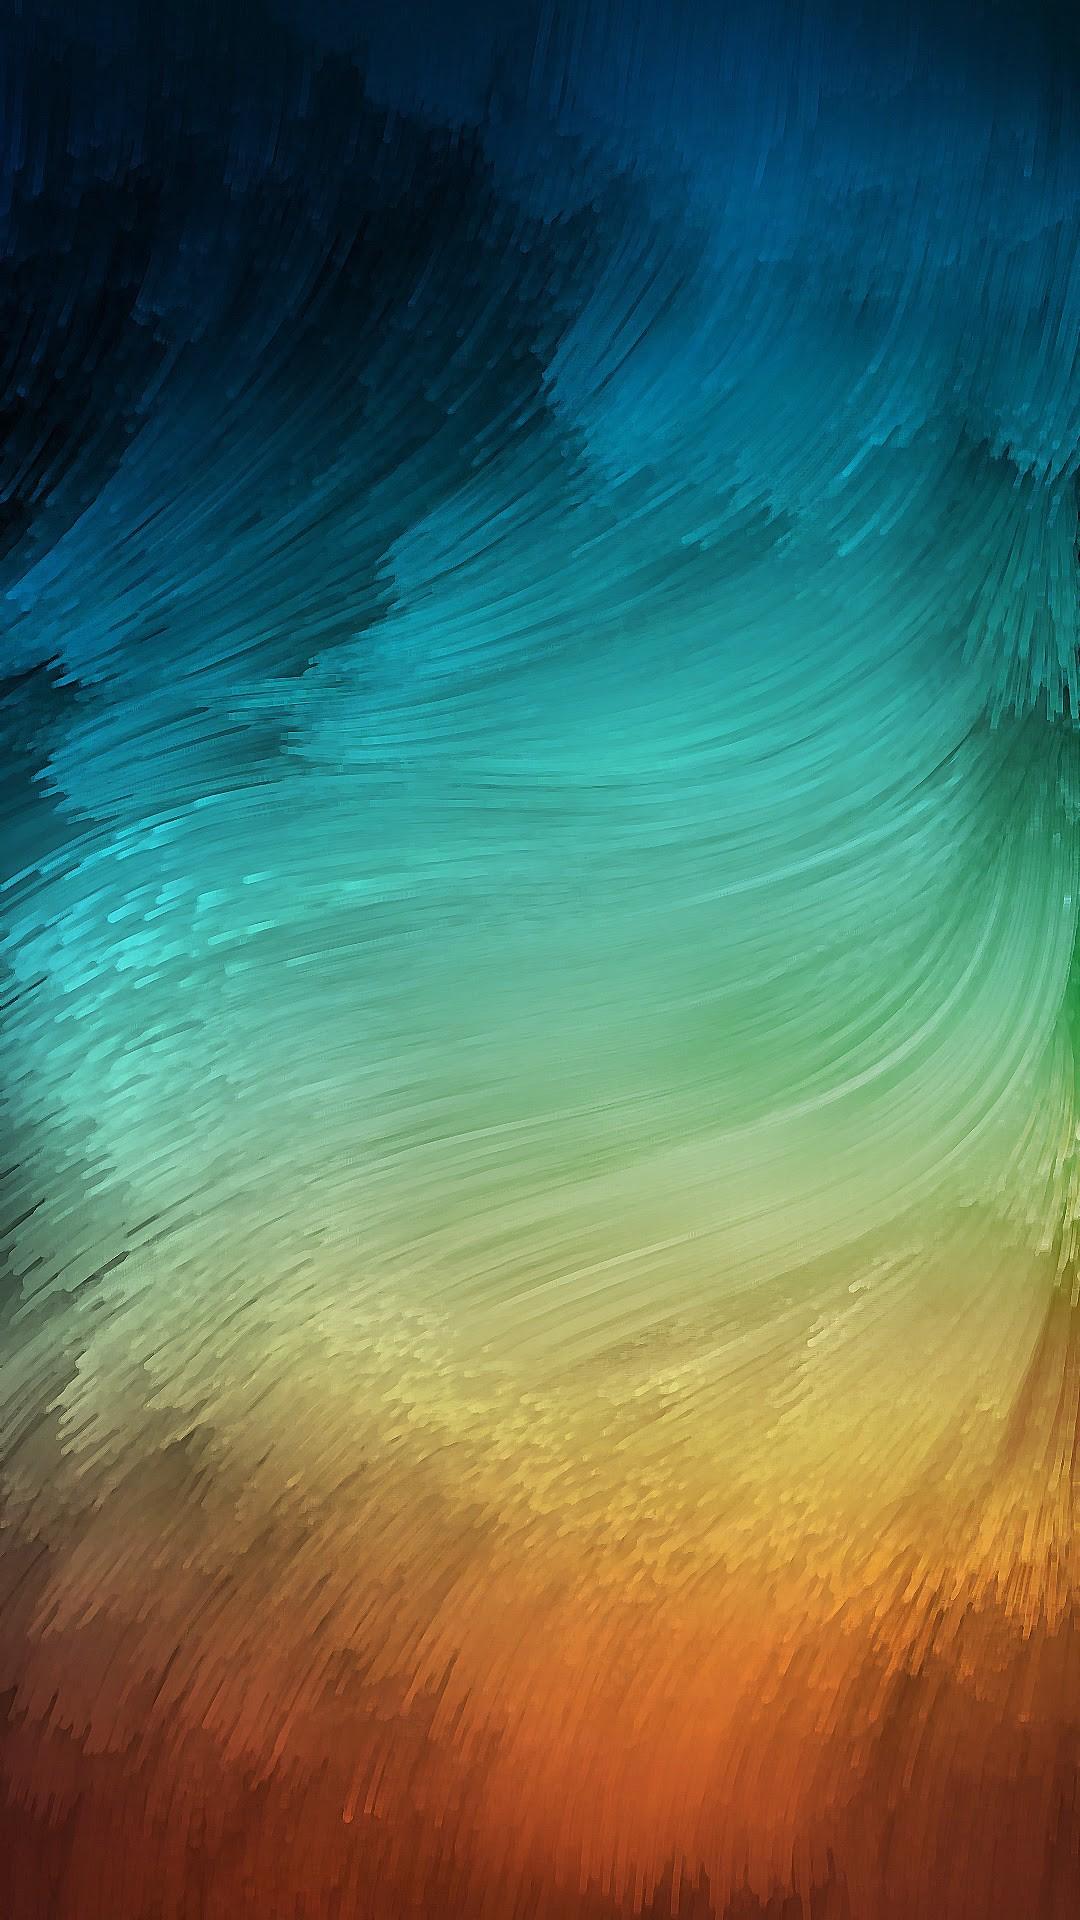 1080 x 1920 · jpeg - IOS 9 Stock Wallpapers (68+ images)